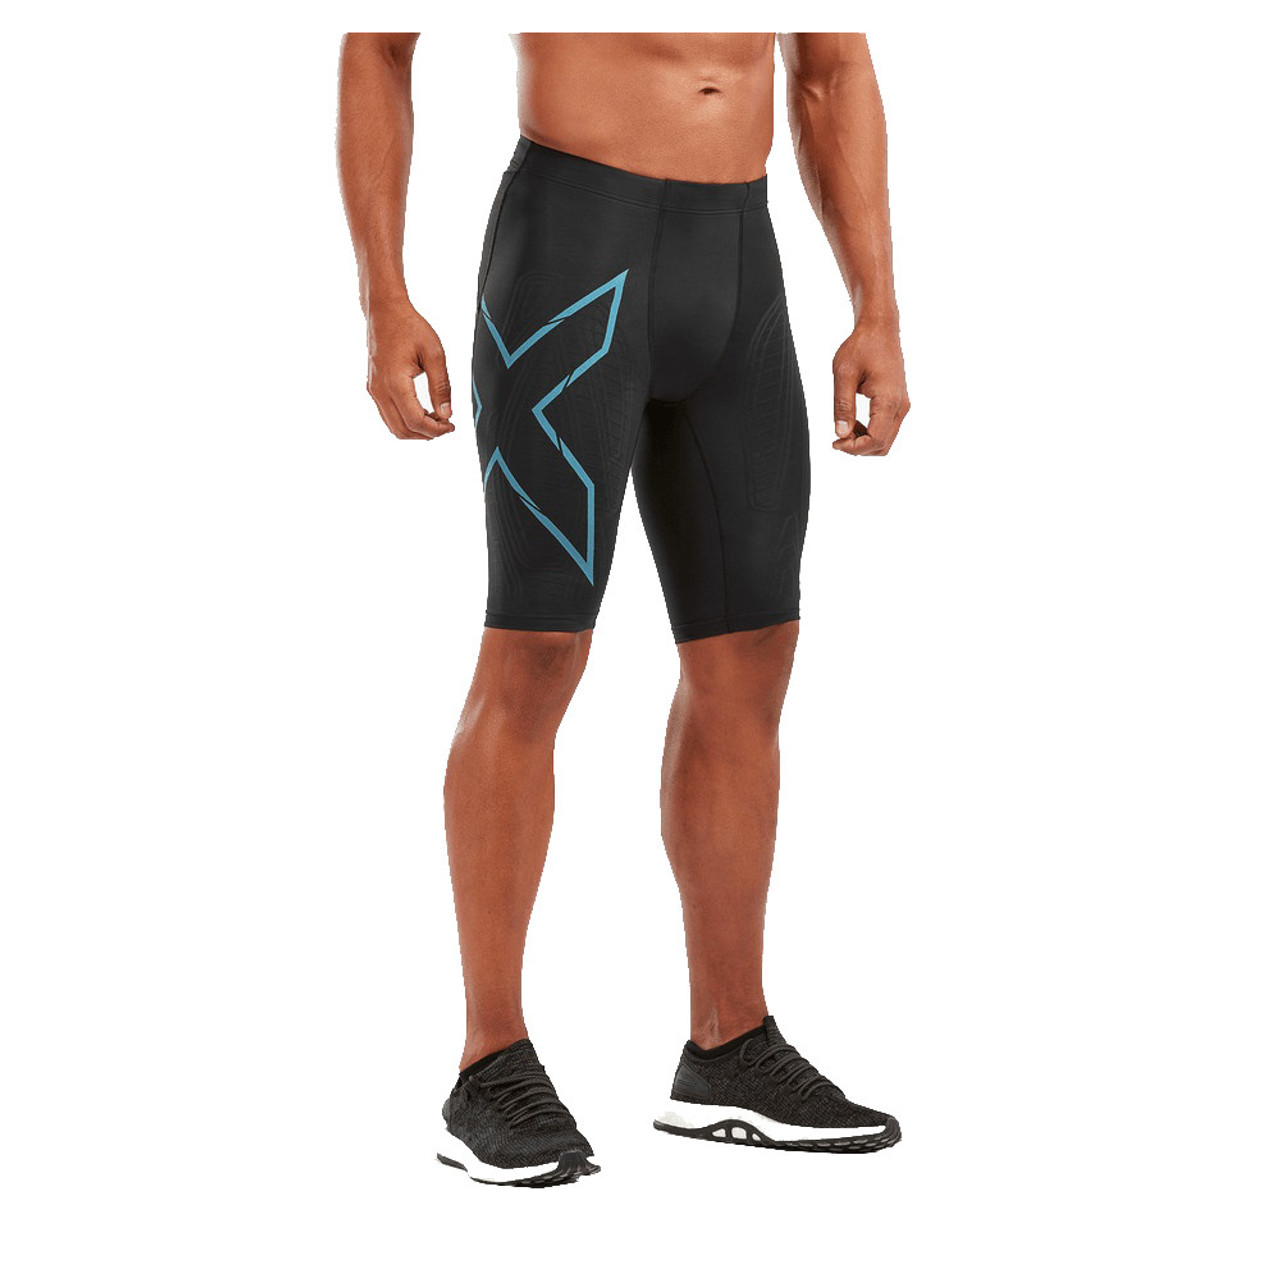 2XU Men's MCS Run Compression Tights with Back Storage